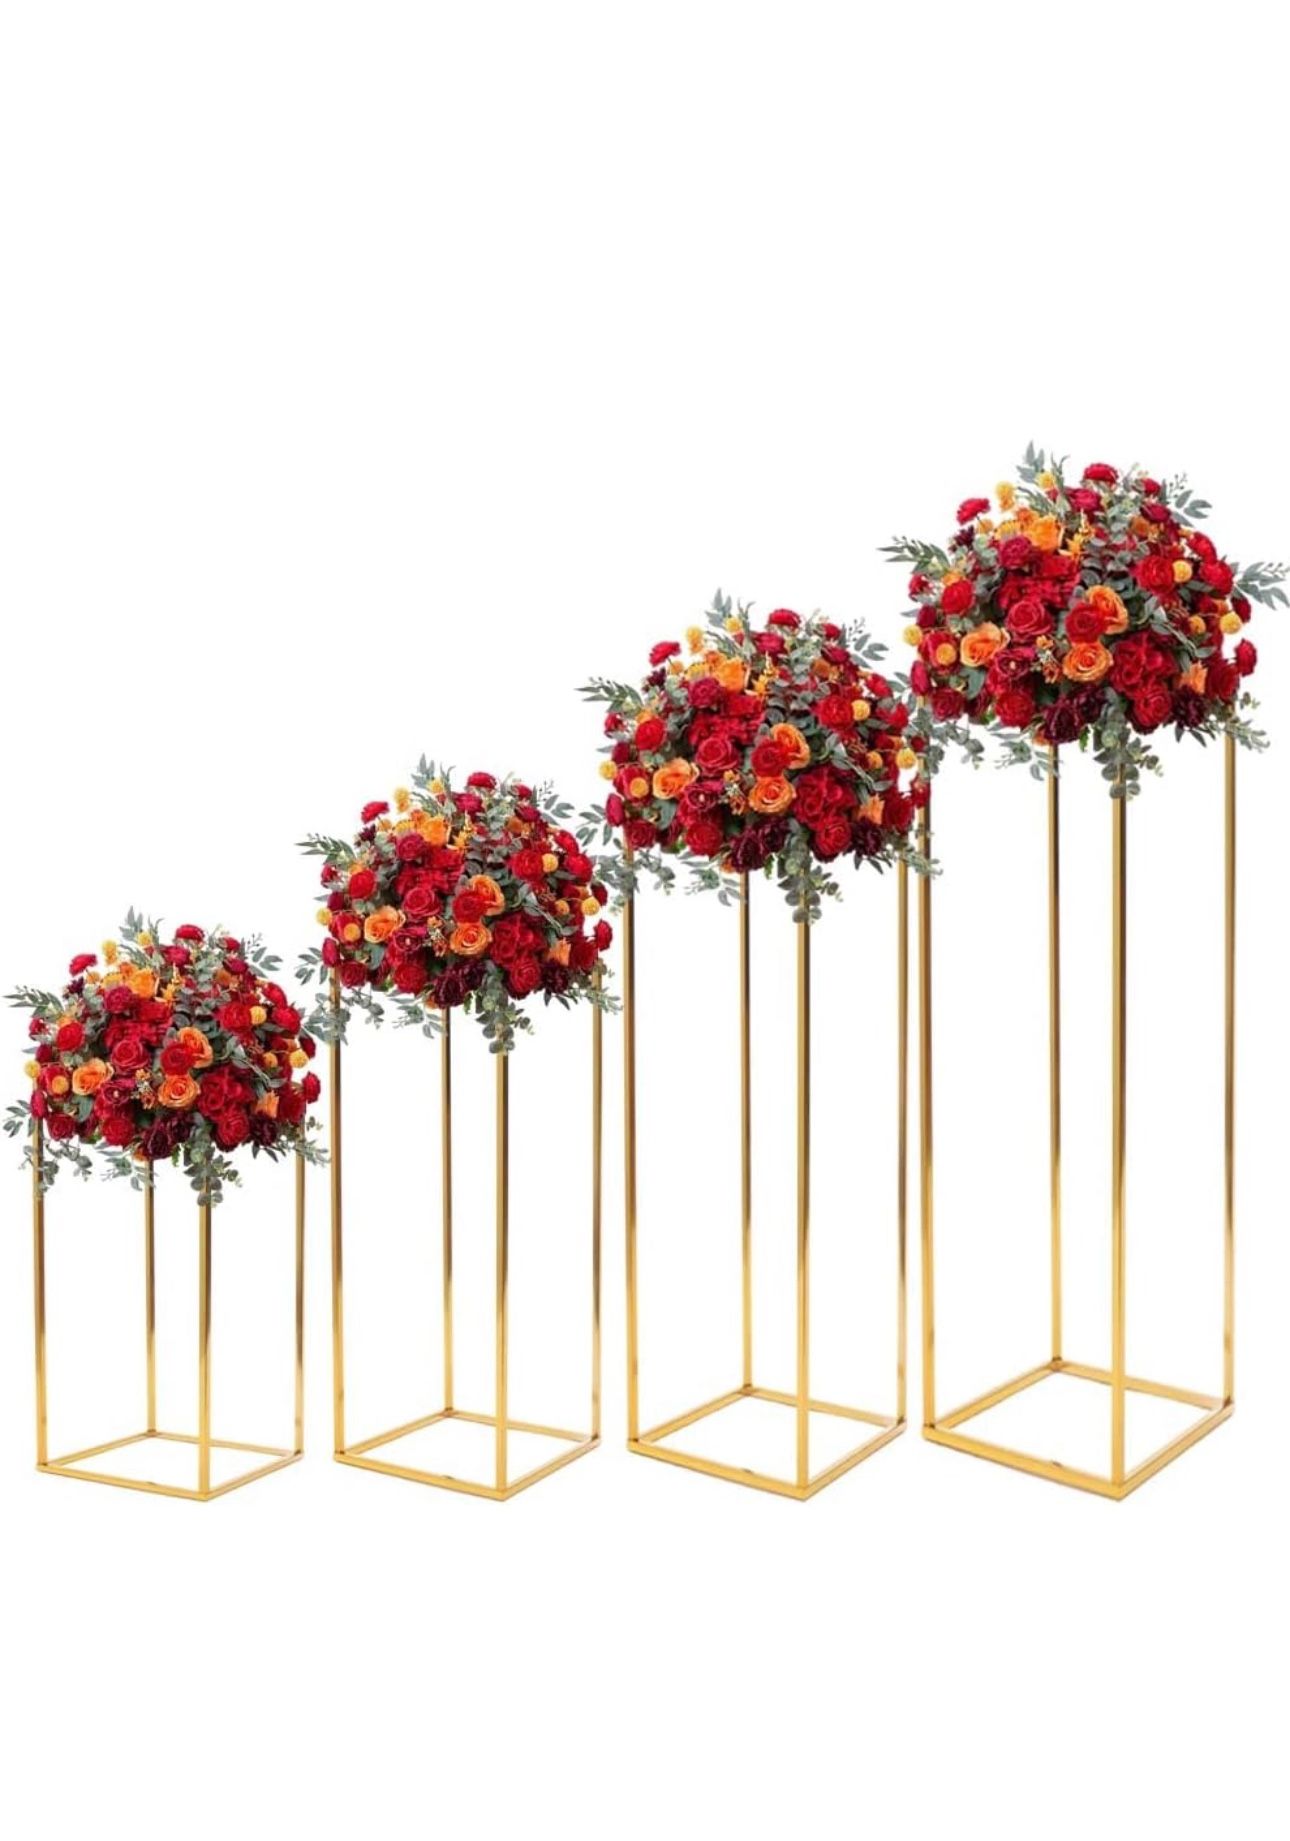 4 Pcs Gold Wedding Flower Stand, Metal Column Flower Stand , 40-100cm Tall Geometric Centerpieces Vase for Table,Flower Rack Home Party Wedding Decora